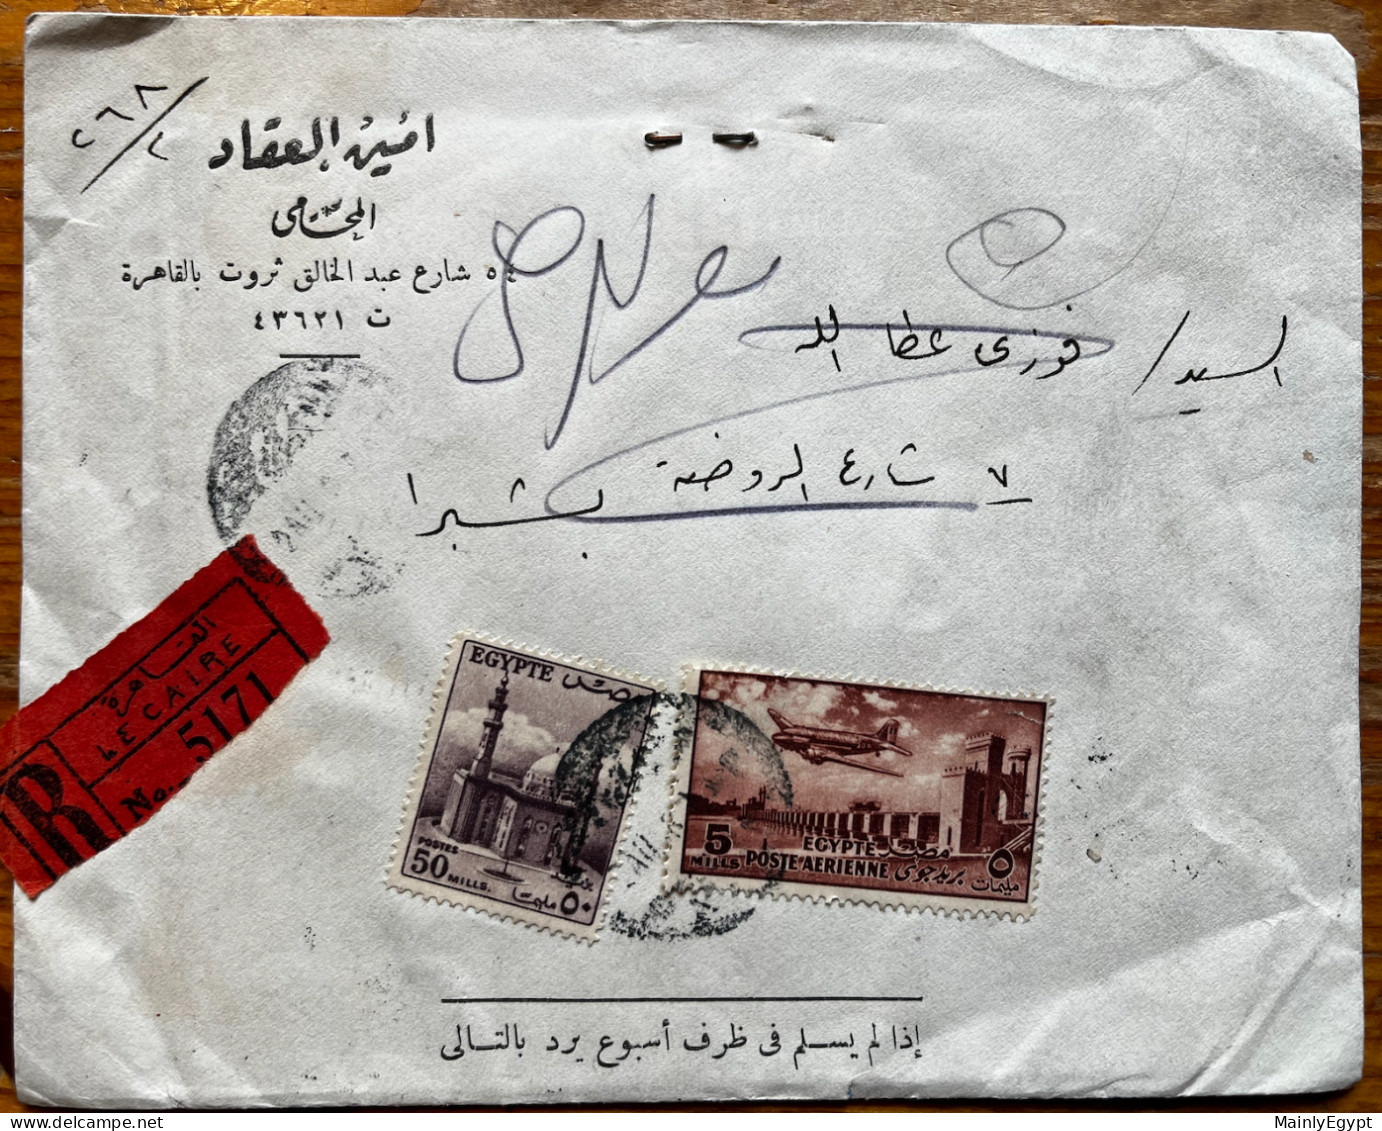 EGYPT: 1956, Registered Letter With 2 Stamps: Mosque And Airmail. Undeliverable So Returned. Unopened With Content #004 - Covers & Documents